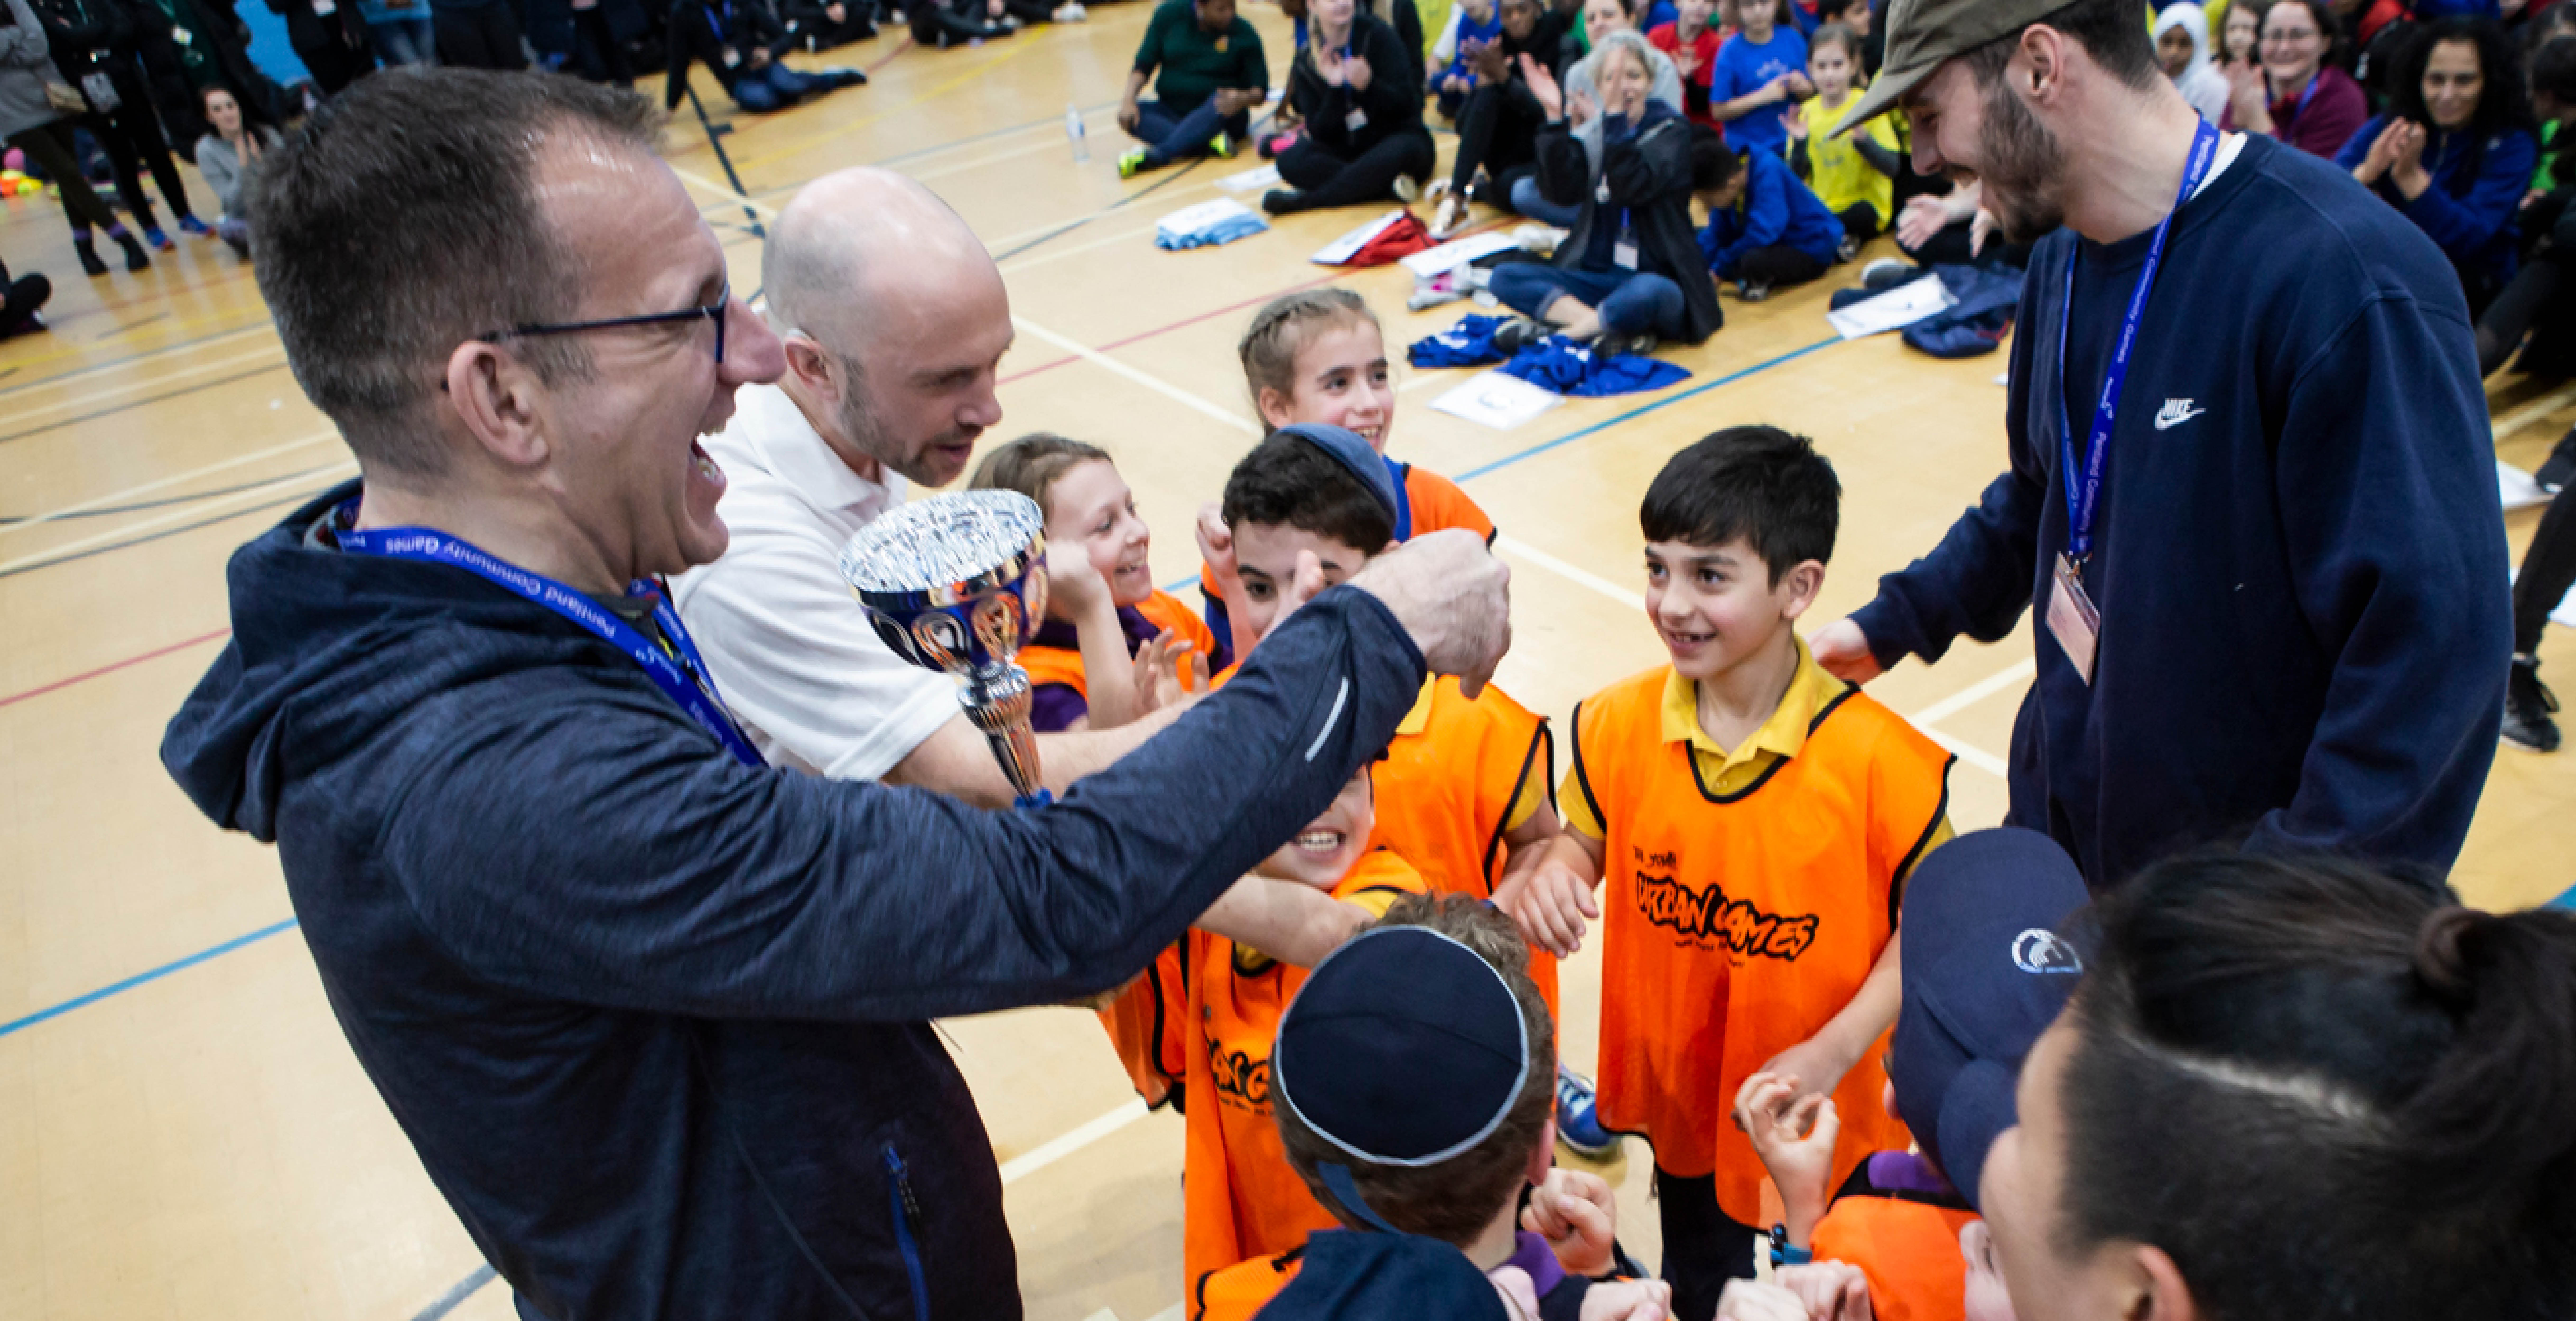 The first SportInspired ‘Pentland Community Games’